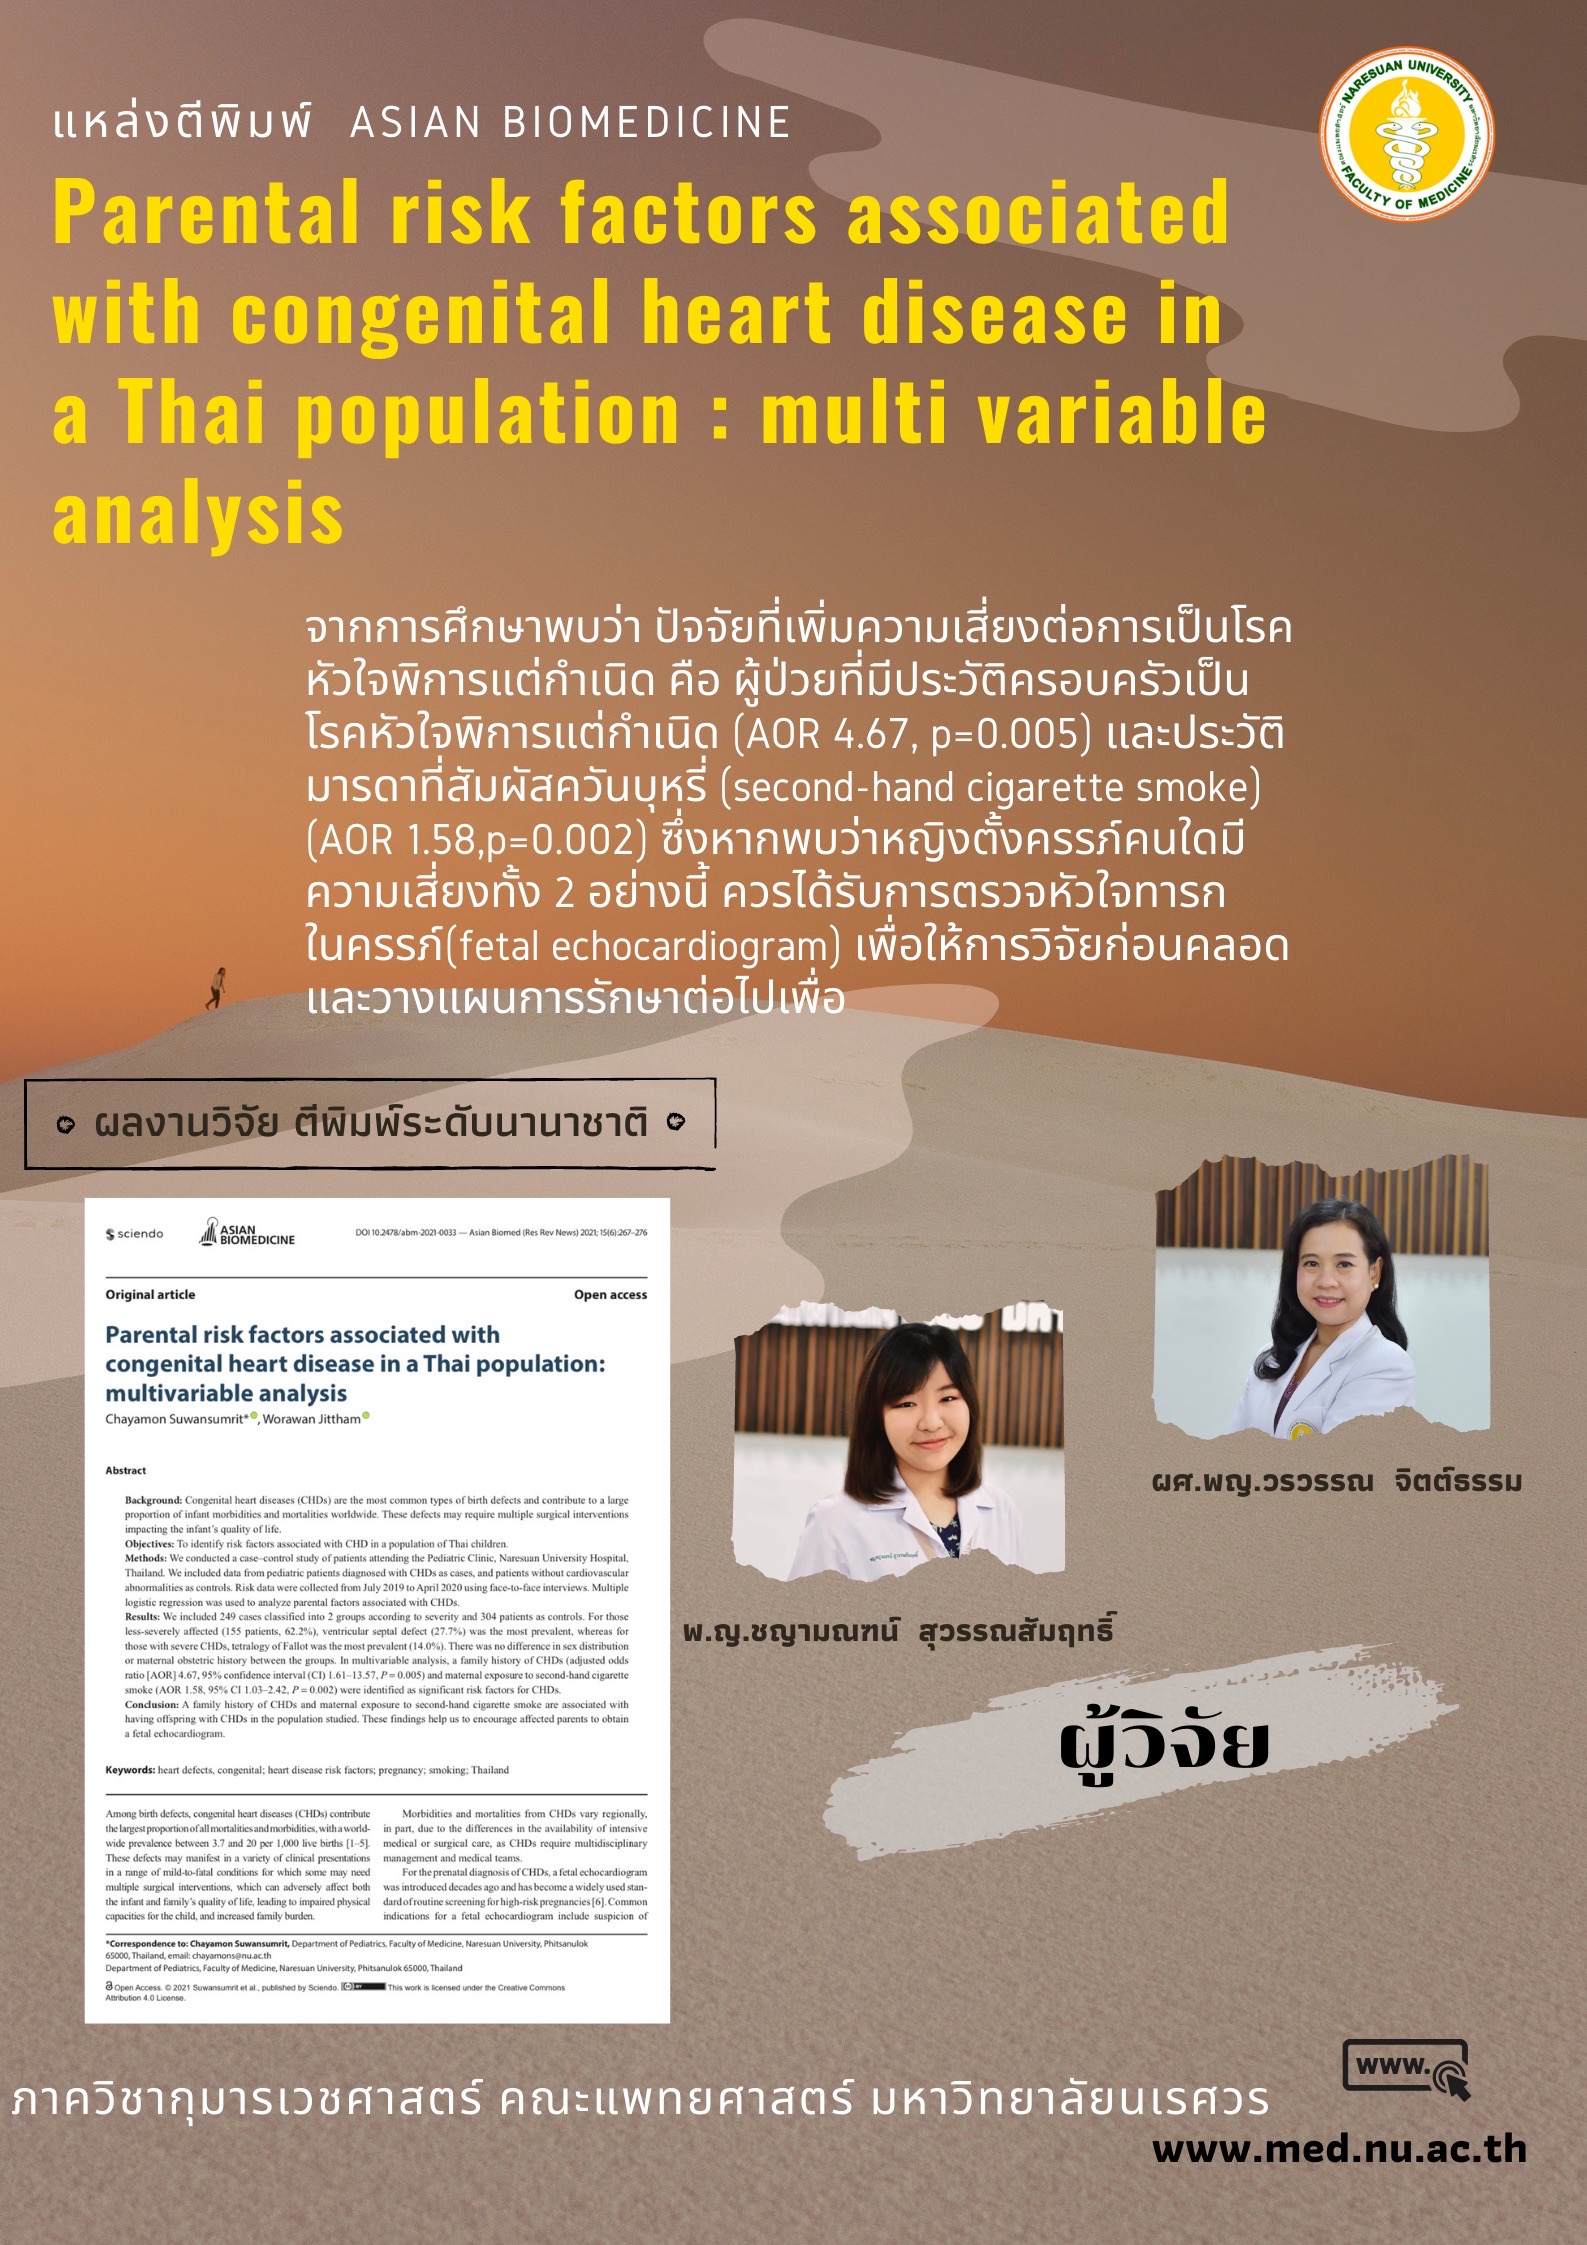 Parental risk factors associated with congenital heart disease in a Thai population: multivariable analysis